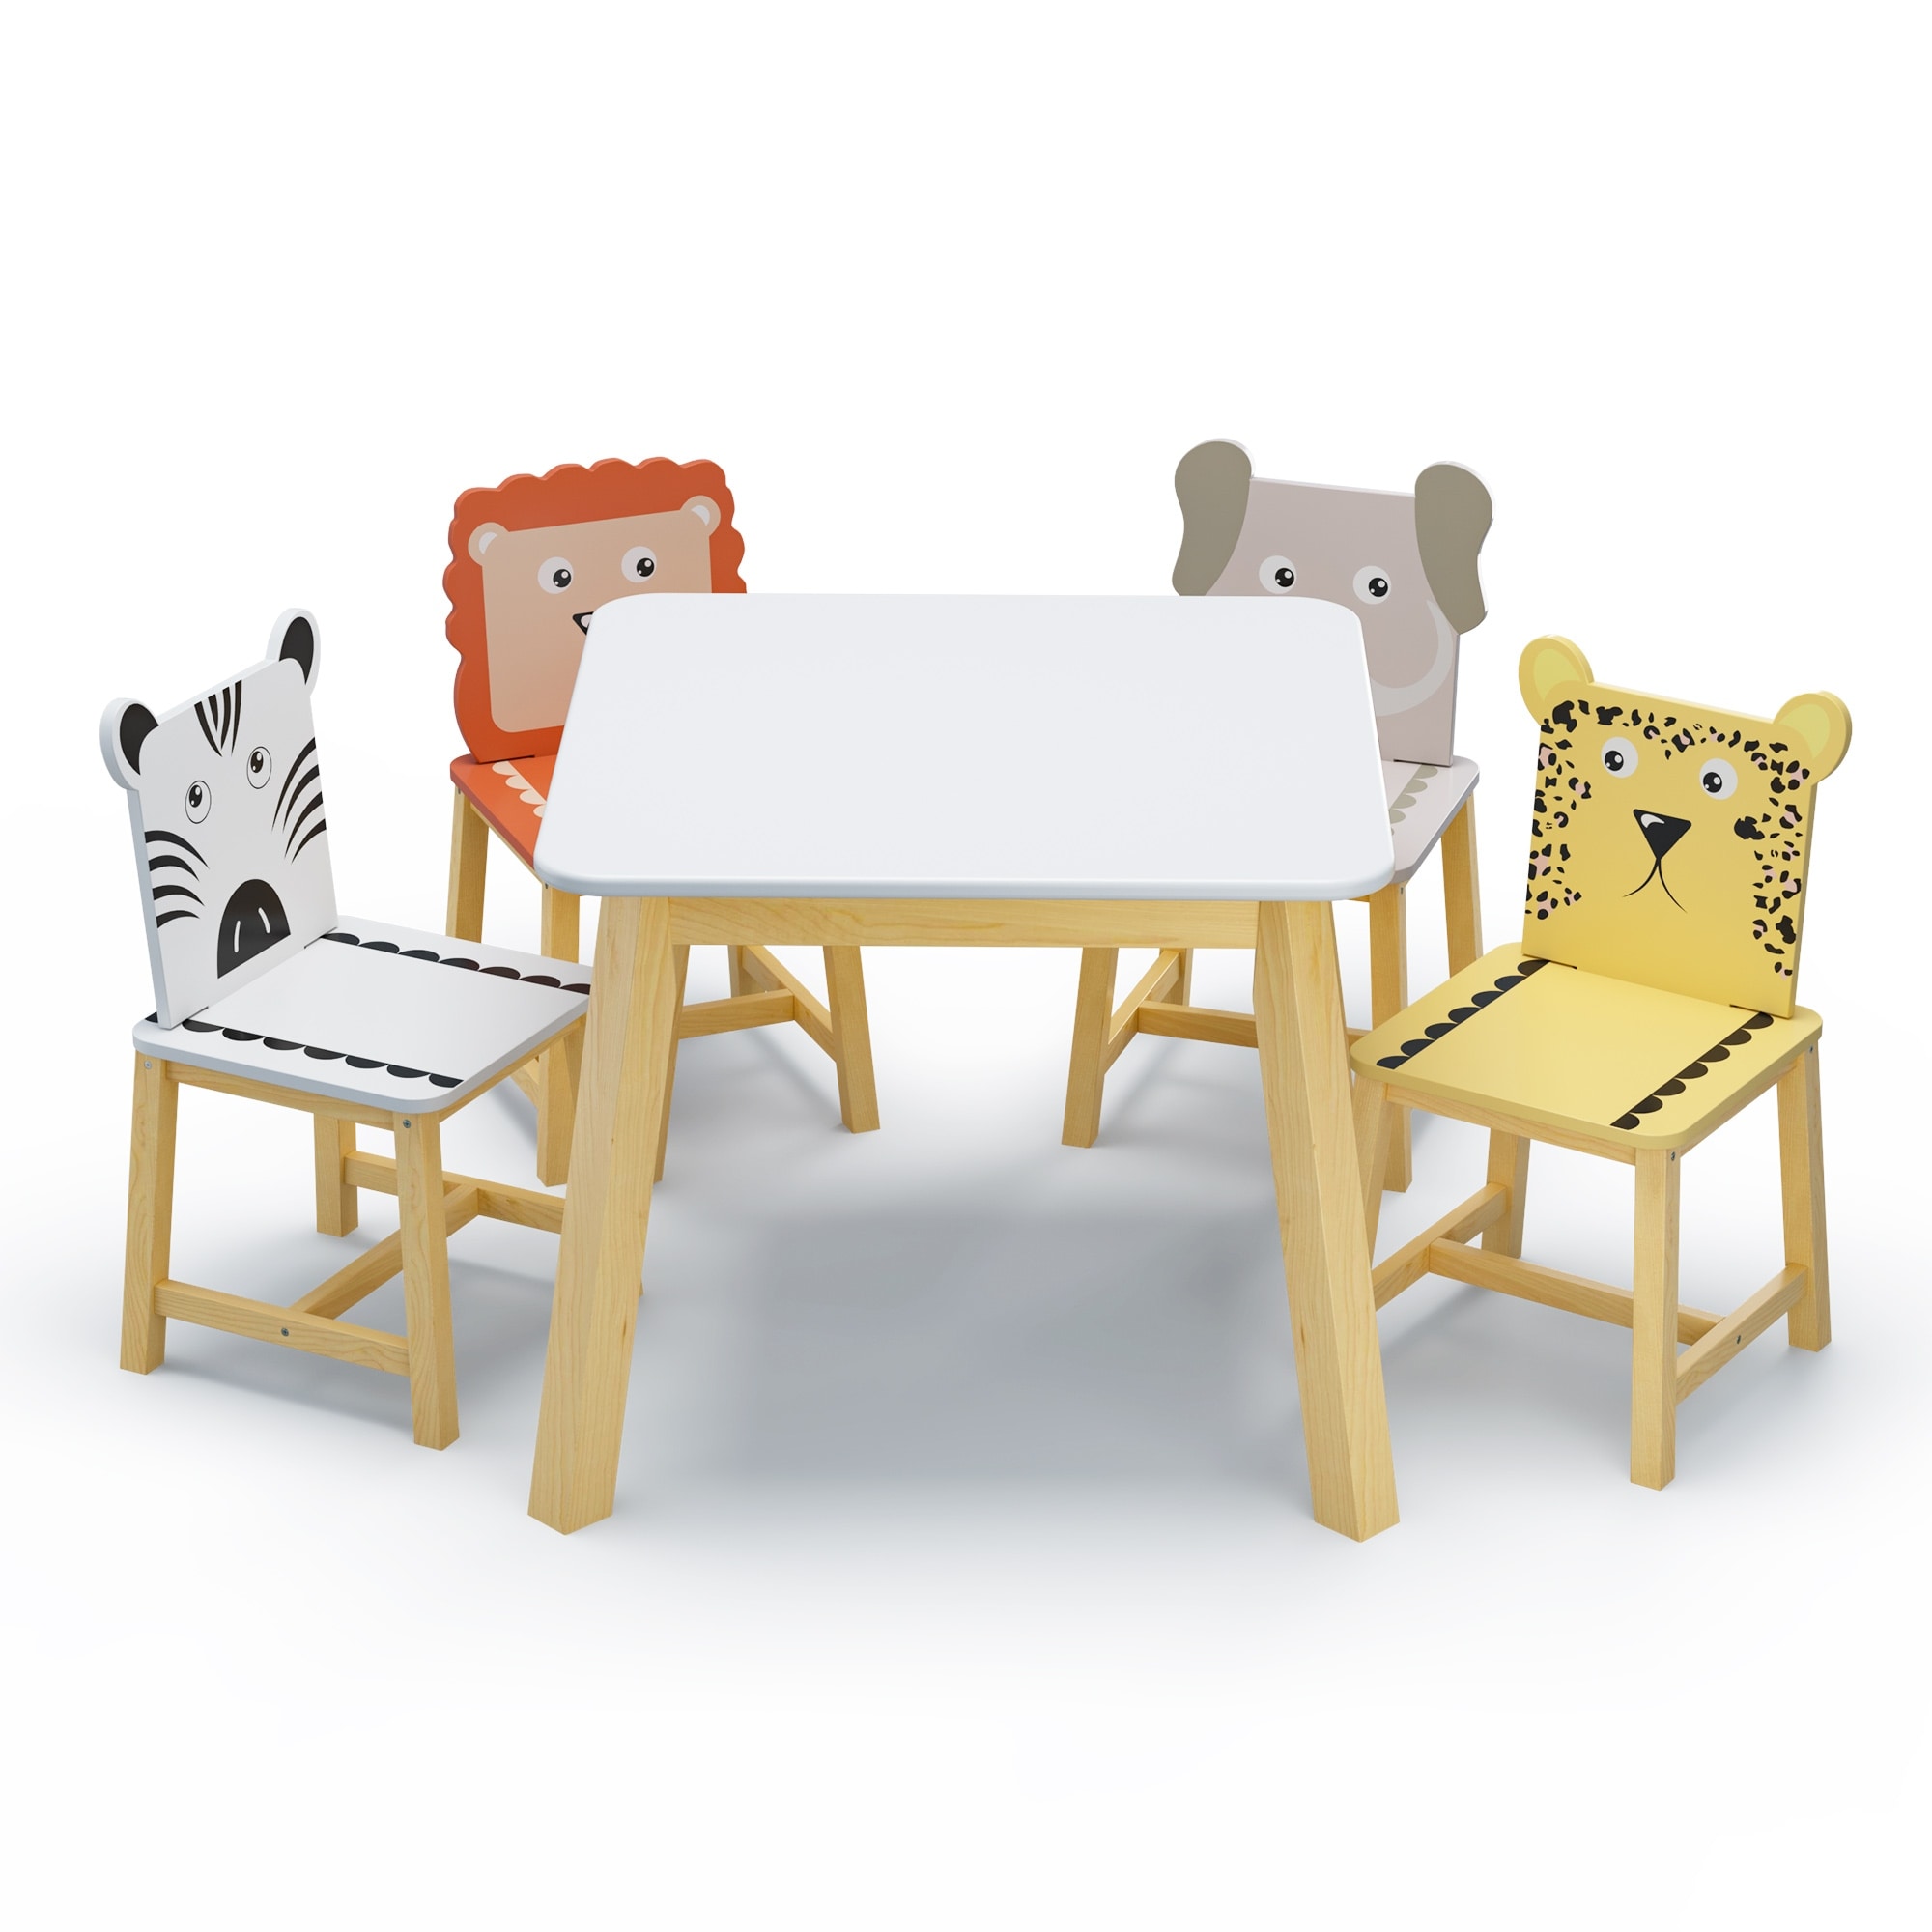 5pcs Activity Art Kids Table and Chair Set w/4 Cartoon Animals Chairs